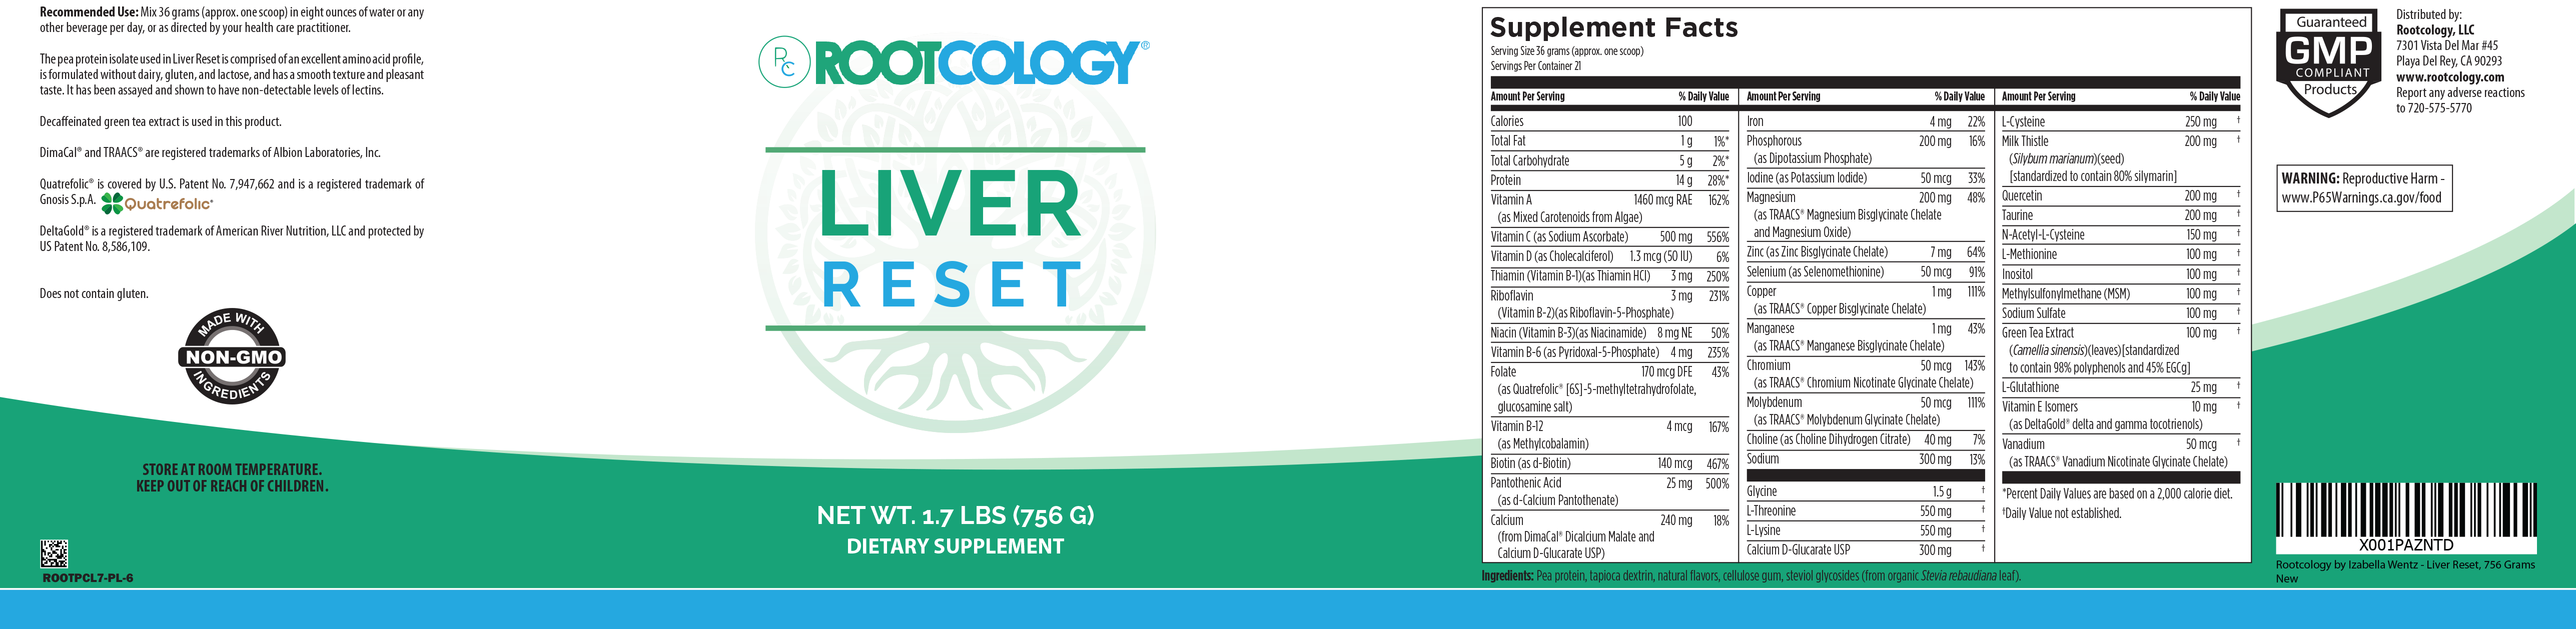 Rootcology Liver Reset Supplement Label